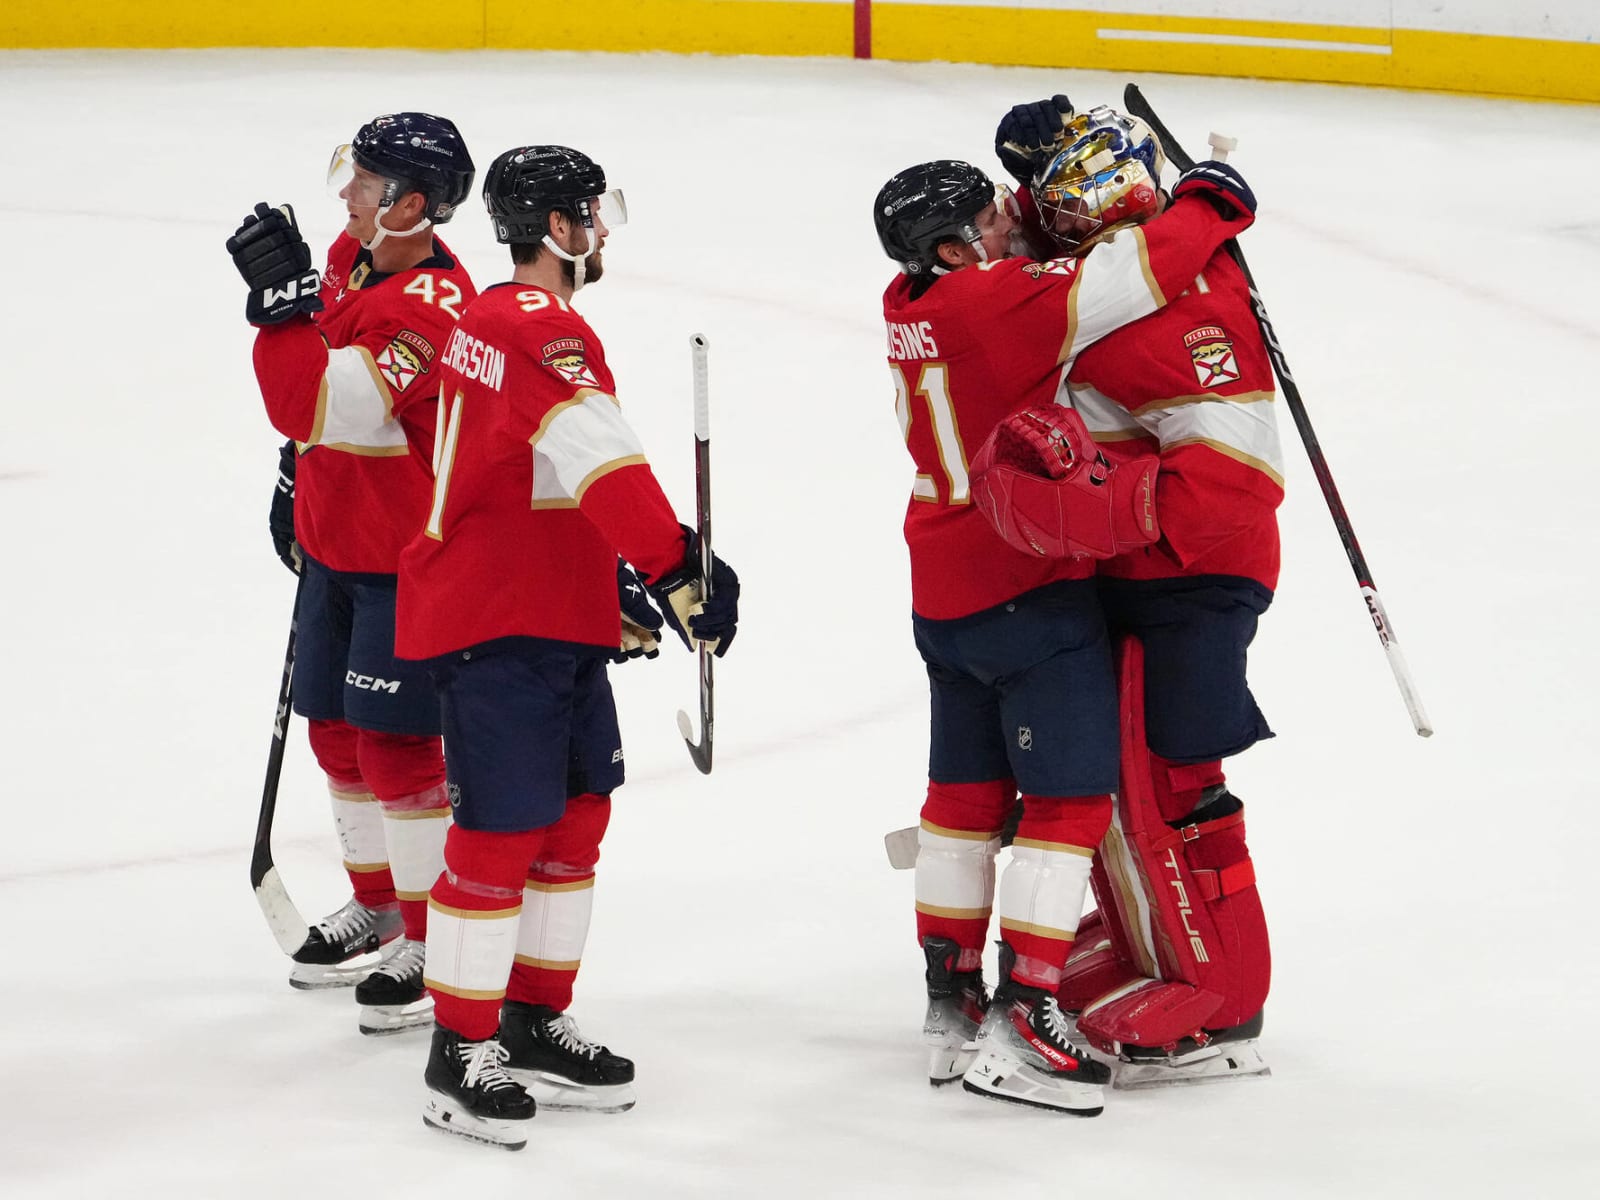 Carter Verhaeghe giving Florida Panthers serious bang for their buck